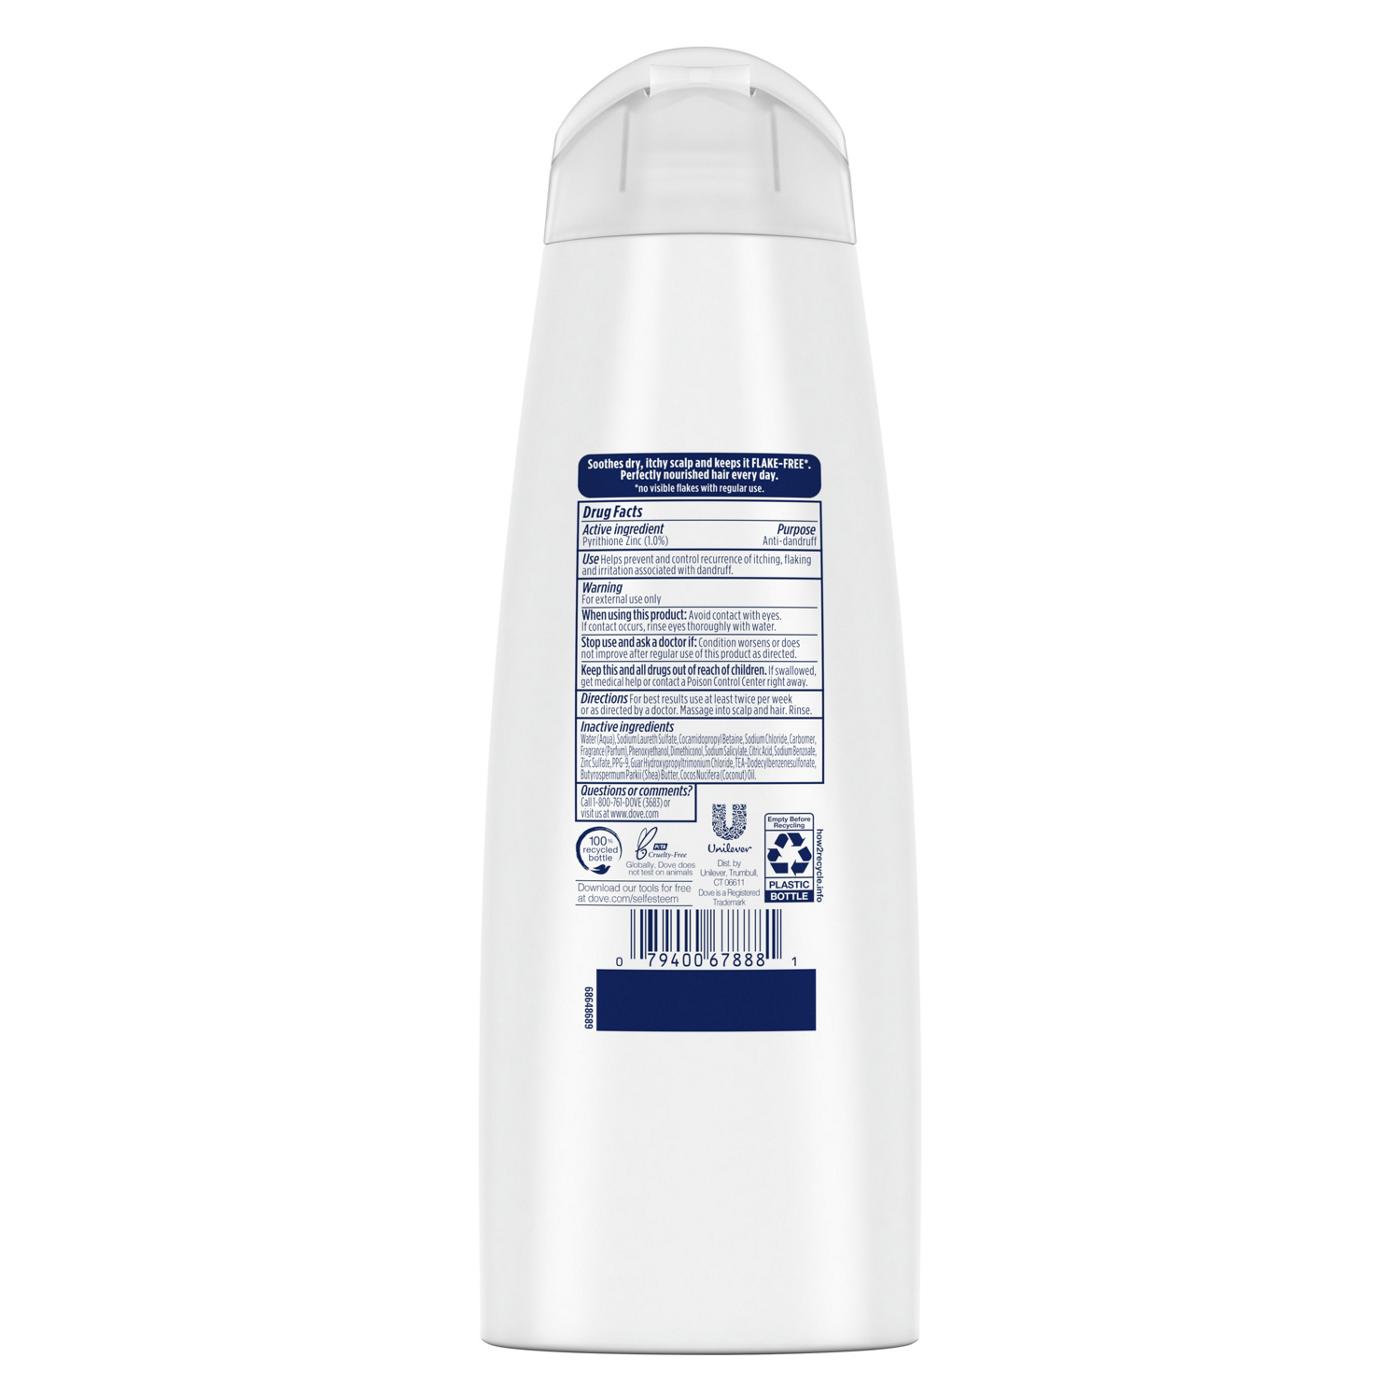 Dove DermaCare Scalp Anti-Dandruff Shampoo - Dryness & Itch Relief; image 5 of 5